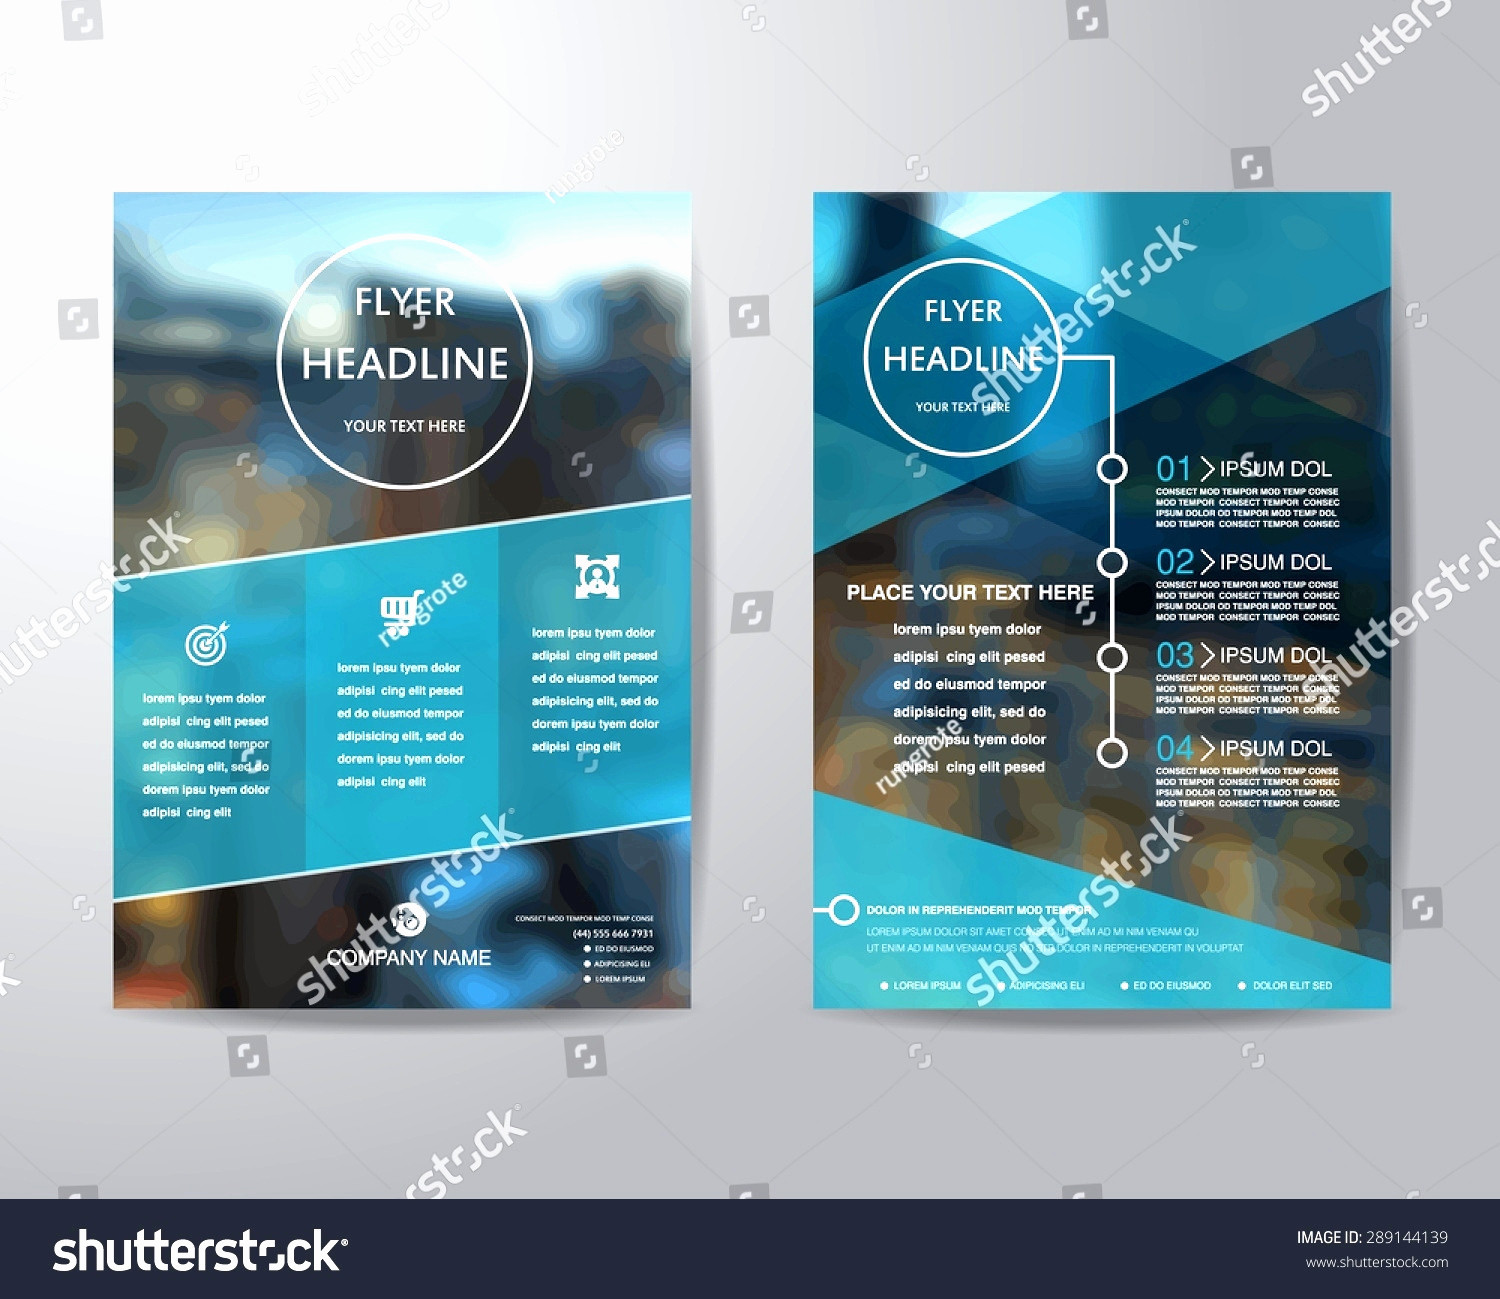 Resume Templates by Moo Awesome S Publisher Real Estate Of Business Card Template Publisher 2010